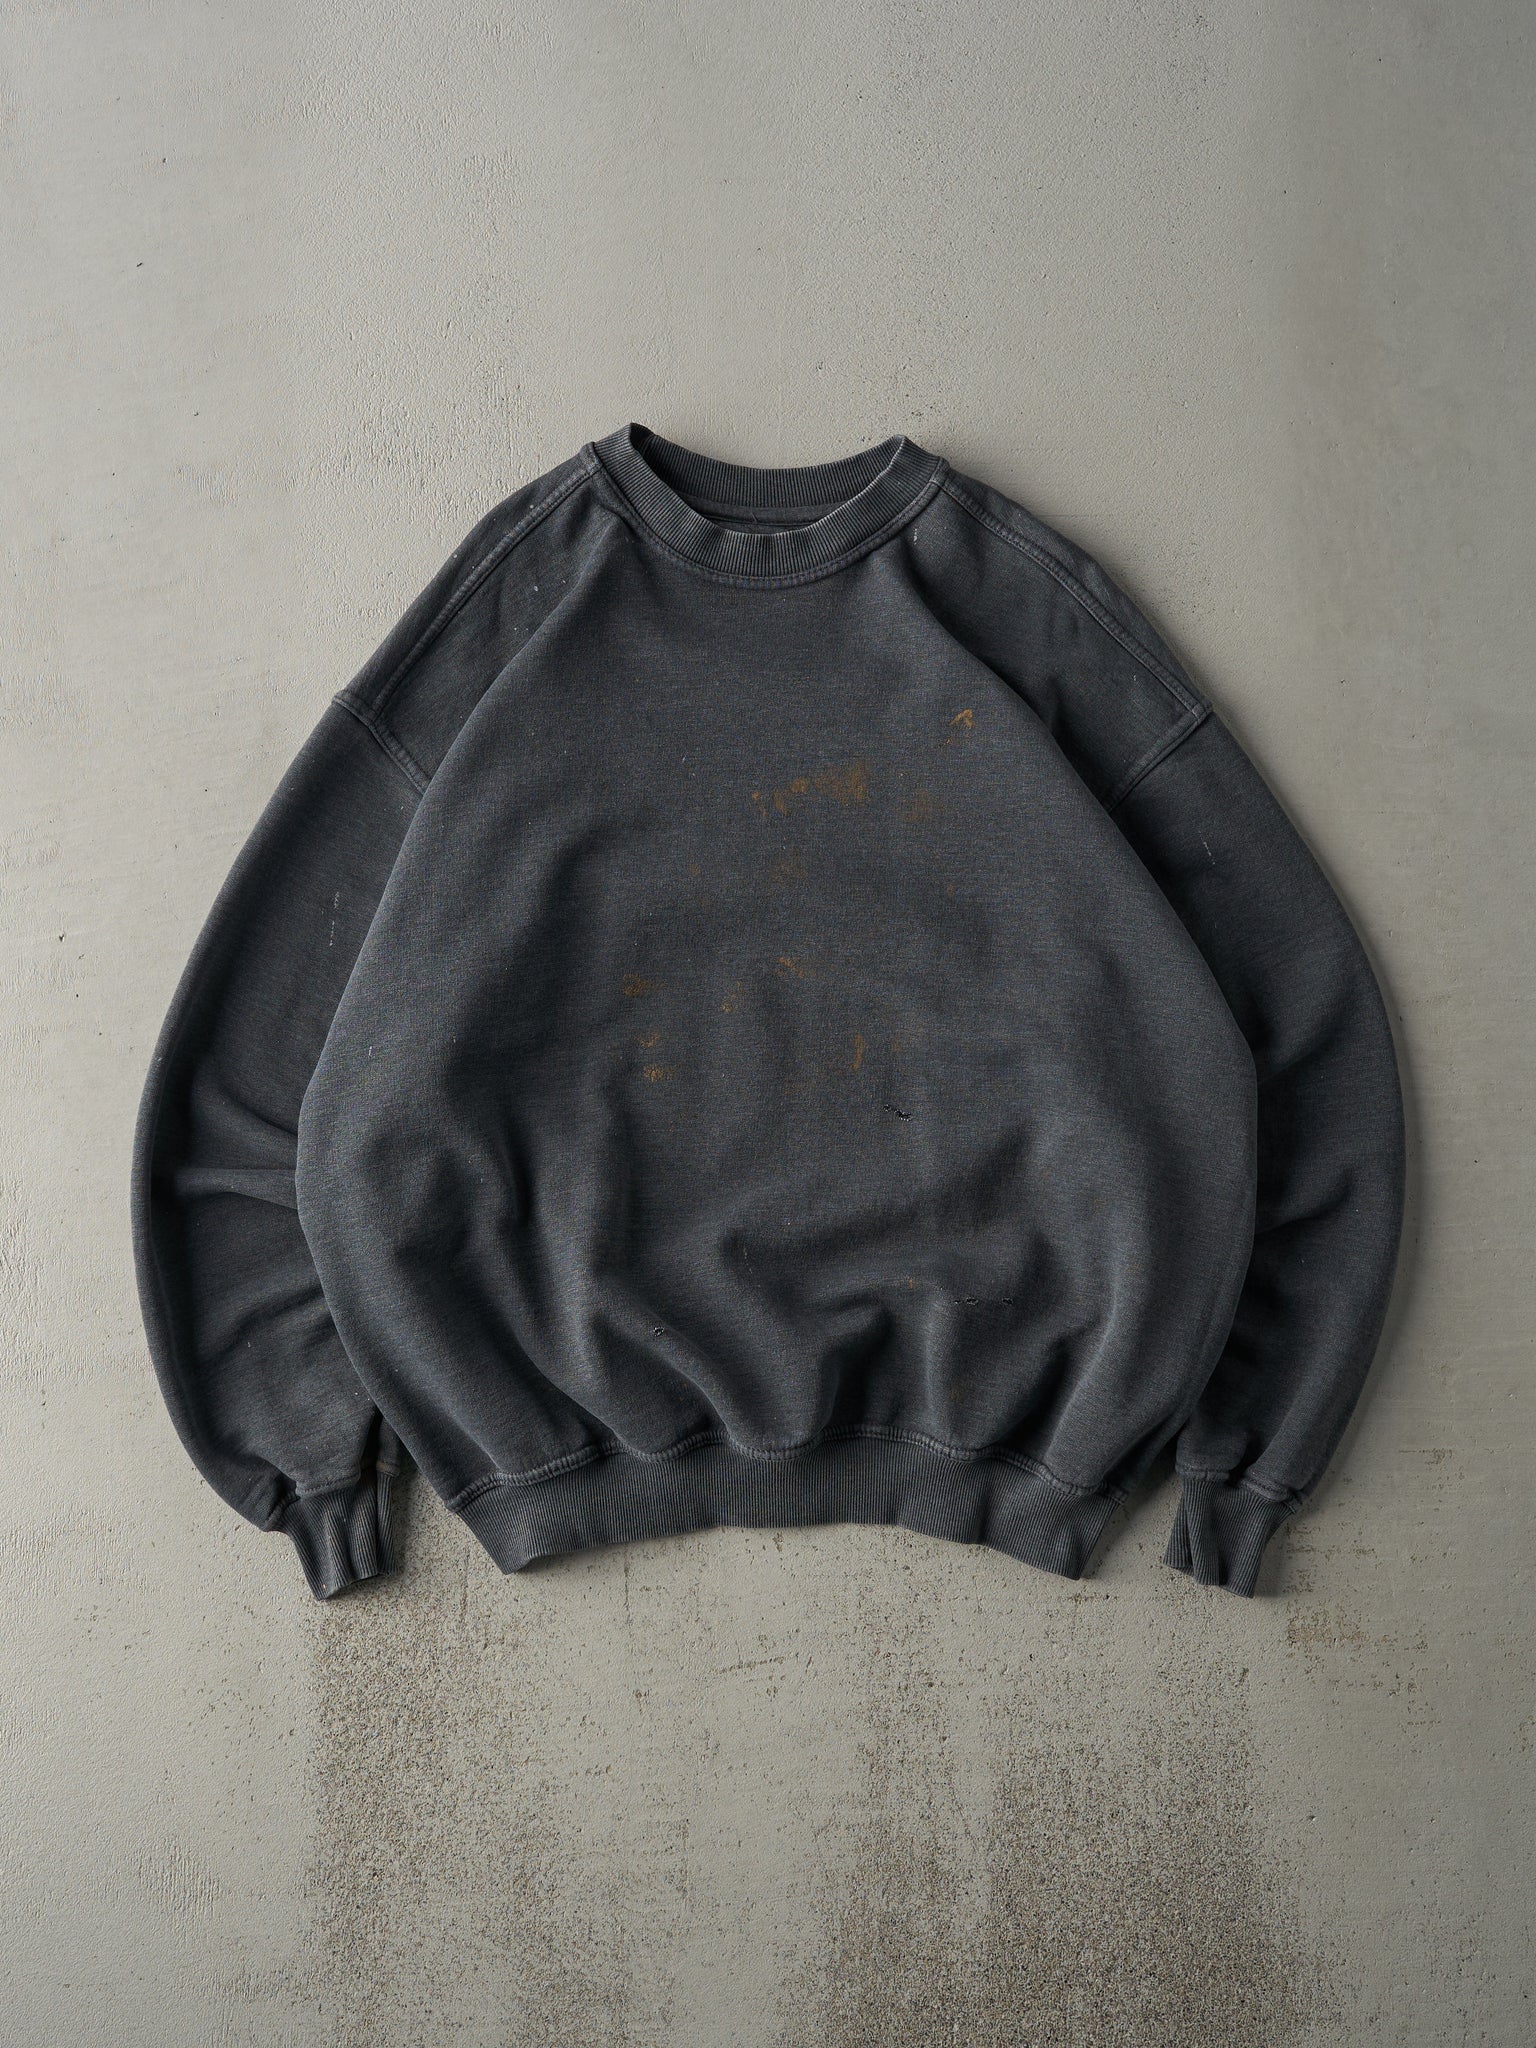 Vintage 90s Charcoal Grey Pluma by Russell Athletic Blank Crewneck (XL)